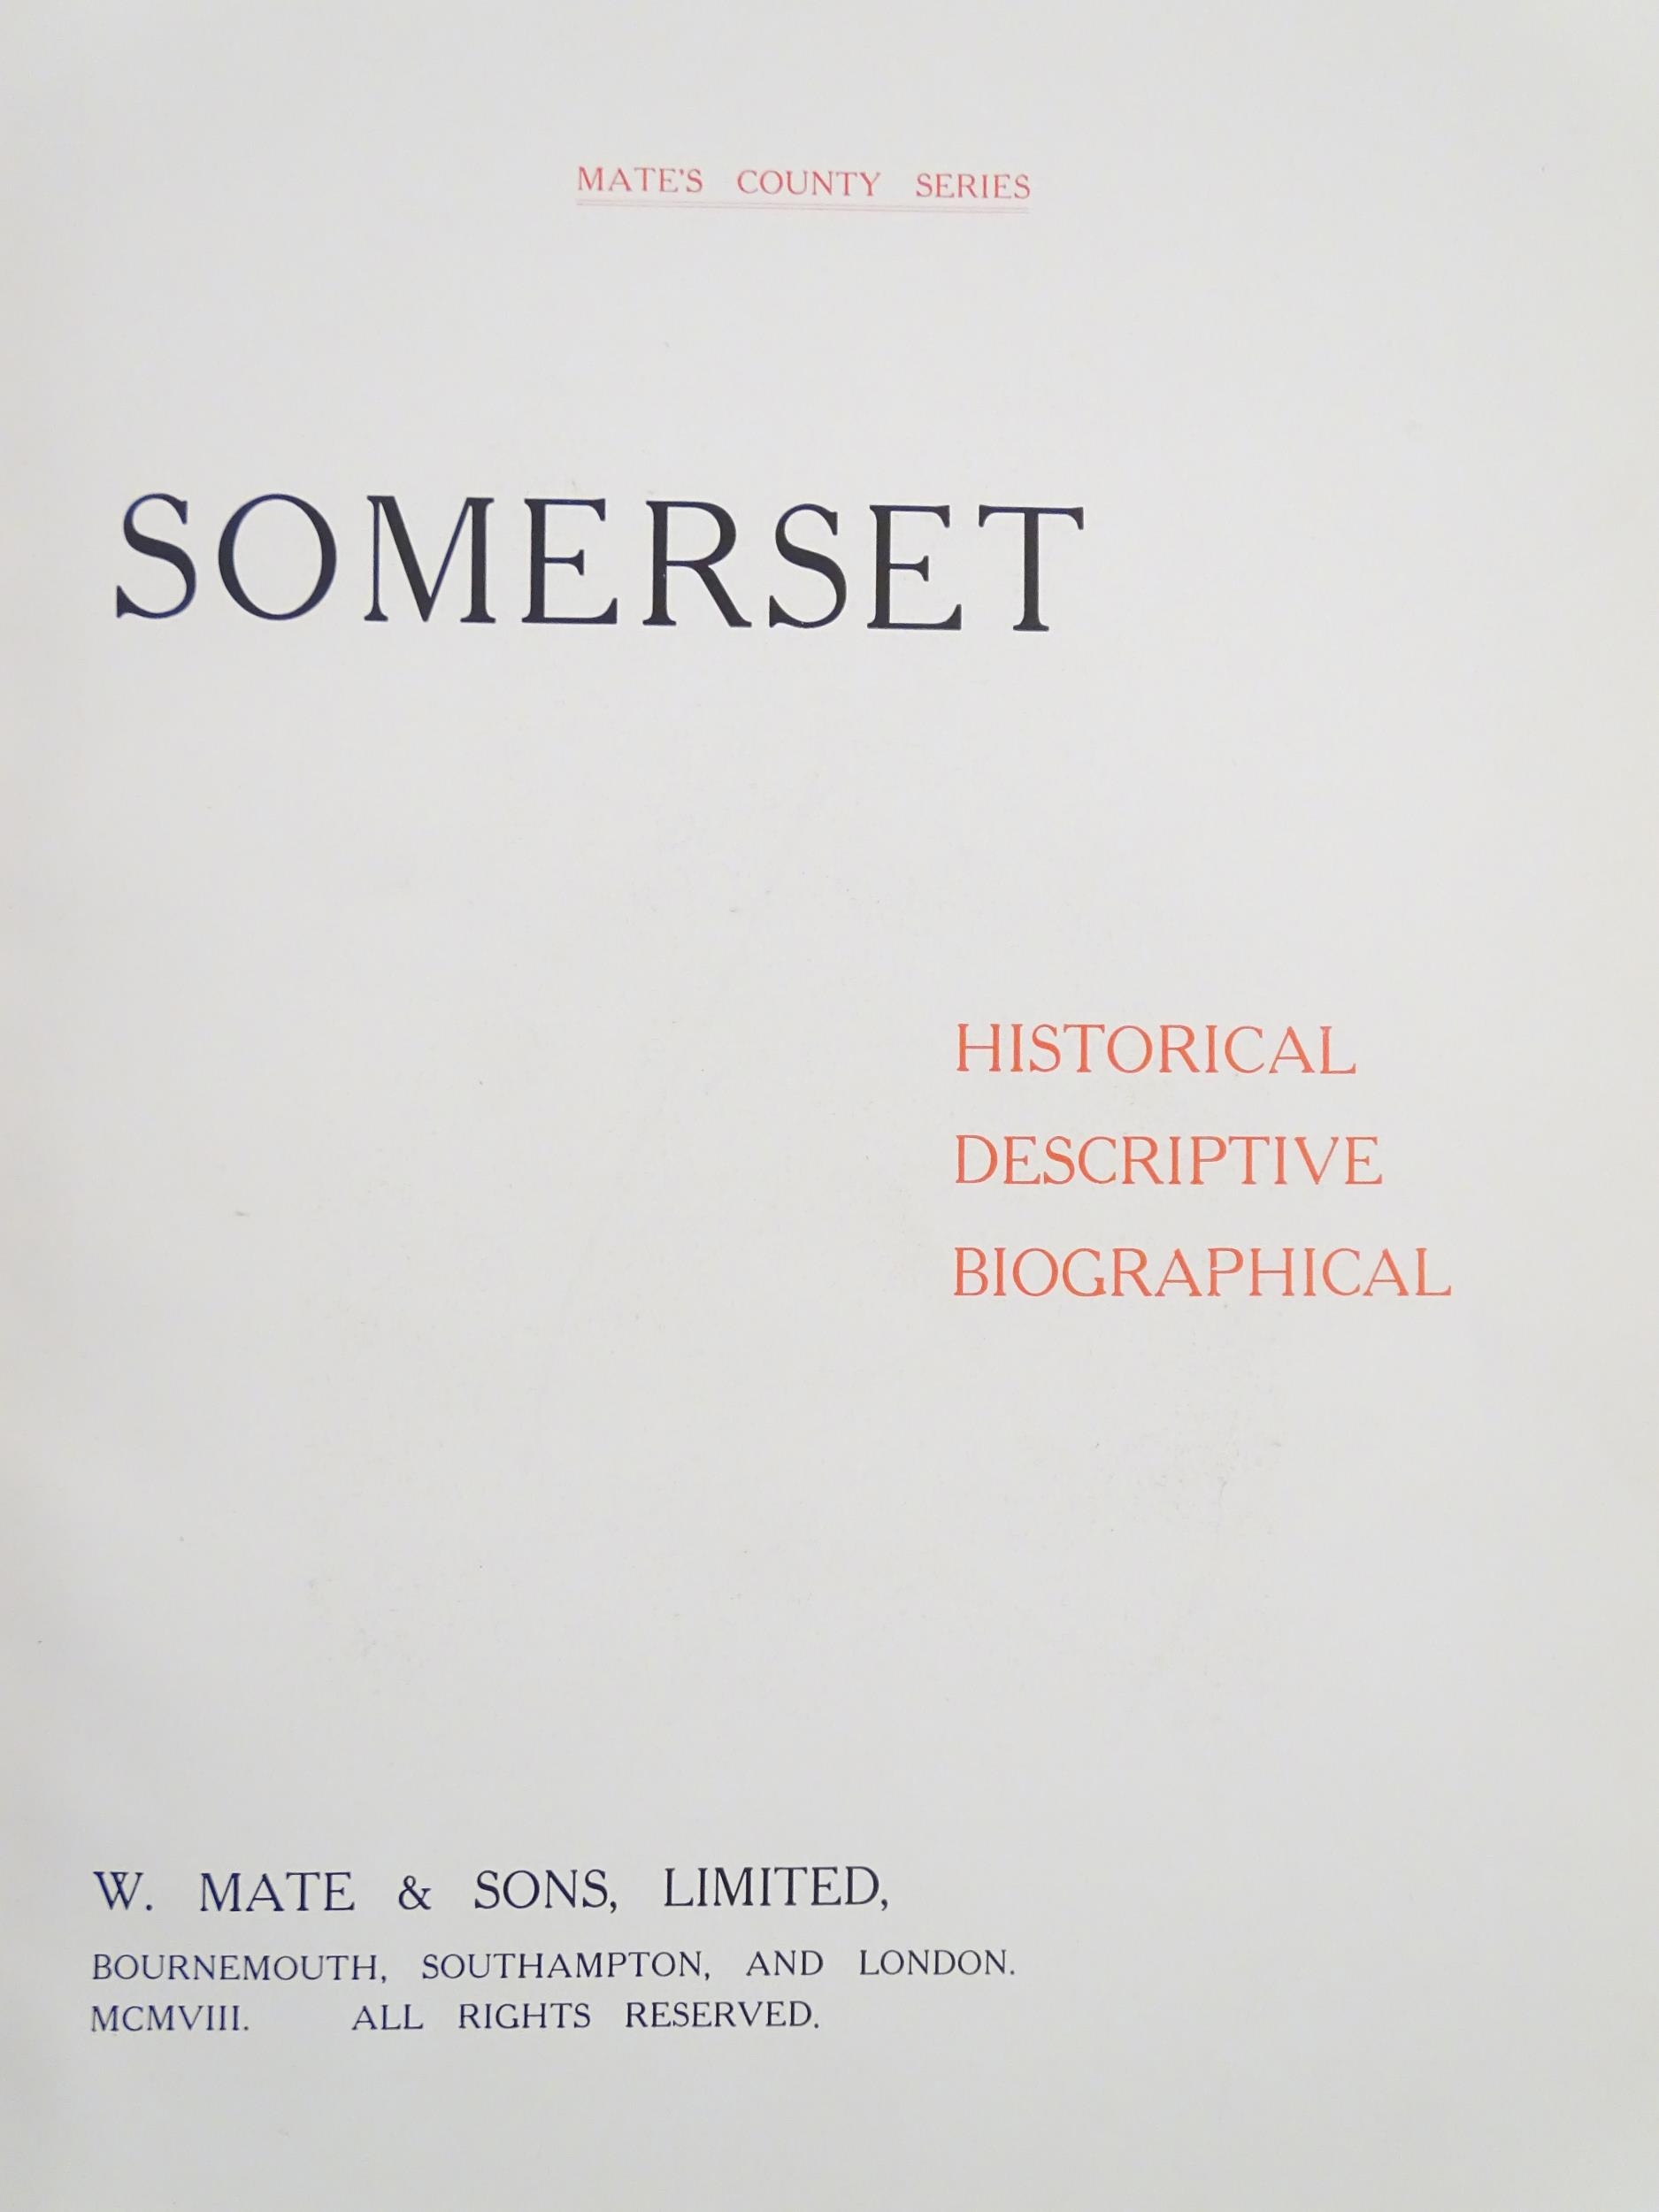 Book: Somerset - Historical, Descriptive, Biographical. Published by W. Mate & Sons Ltd., 1926 for - Image 4 of 11